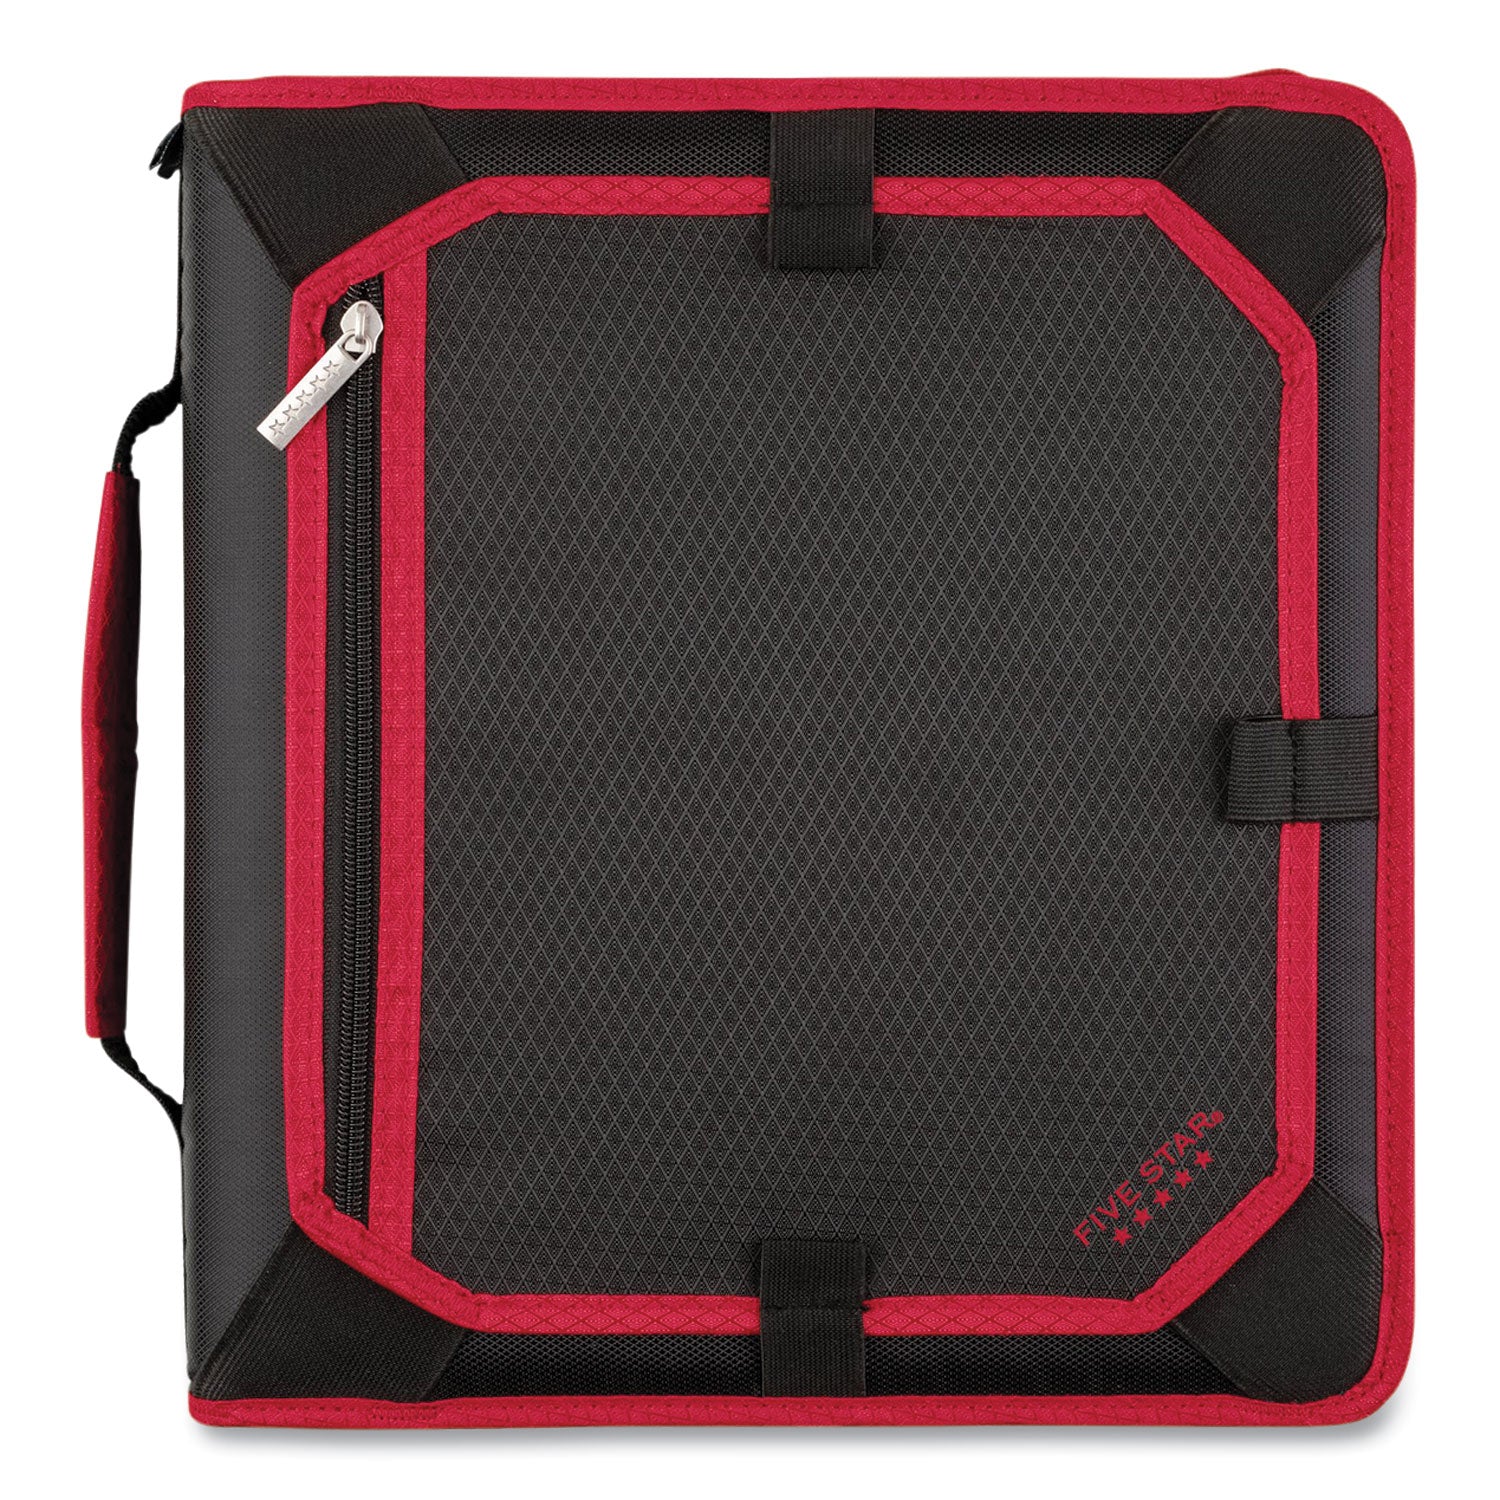 zipper-binder-3-rings-2-capacity-11-x-85-black-red-accents_mea29052ce8 - 1